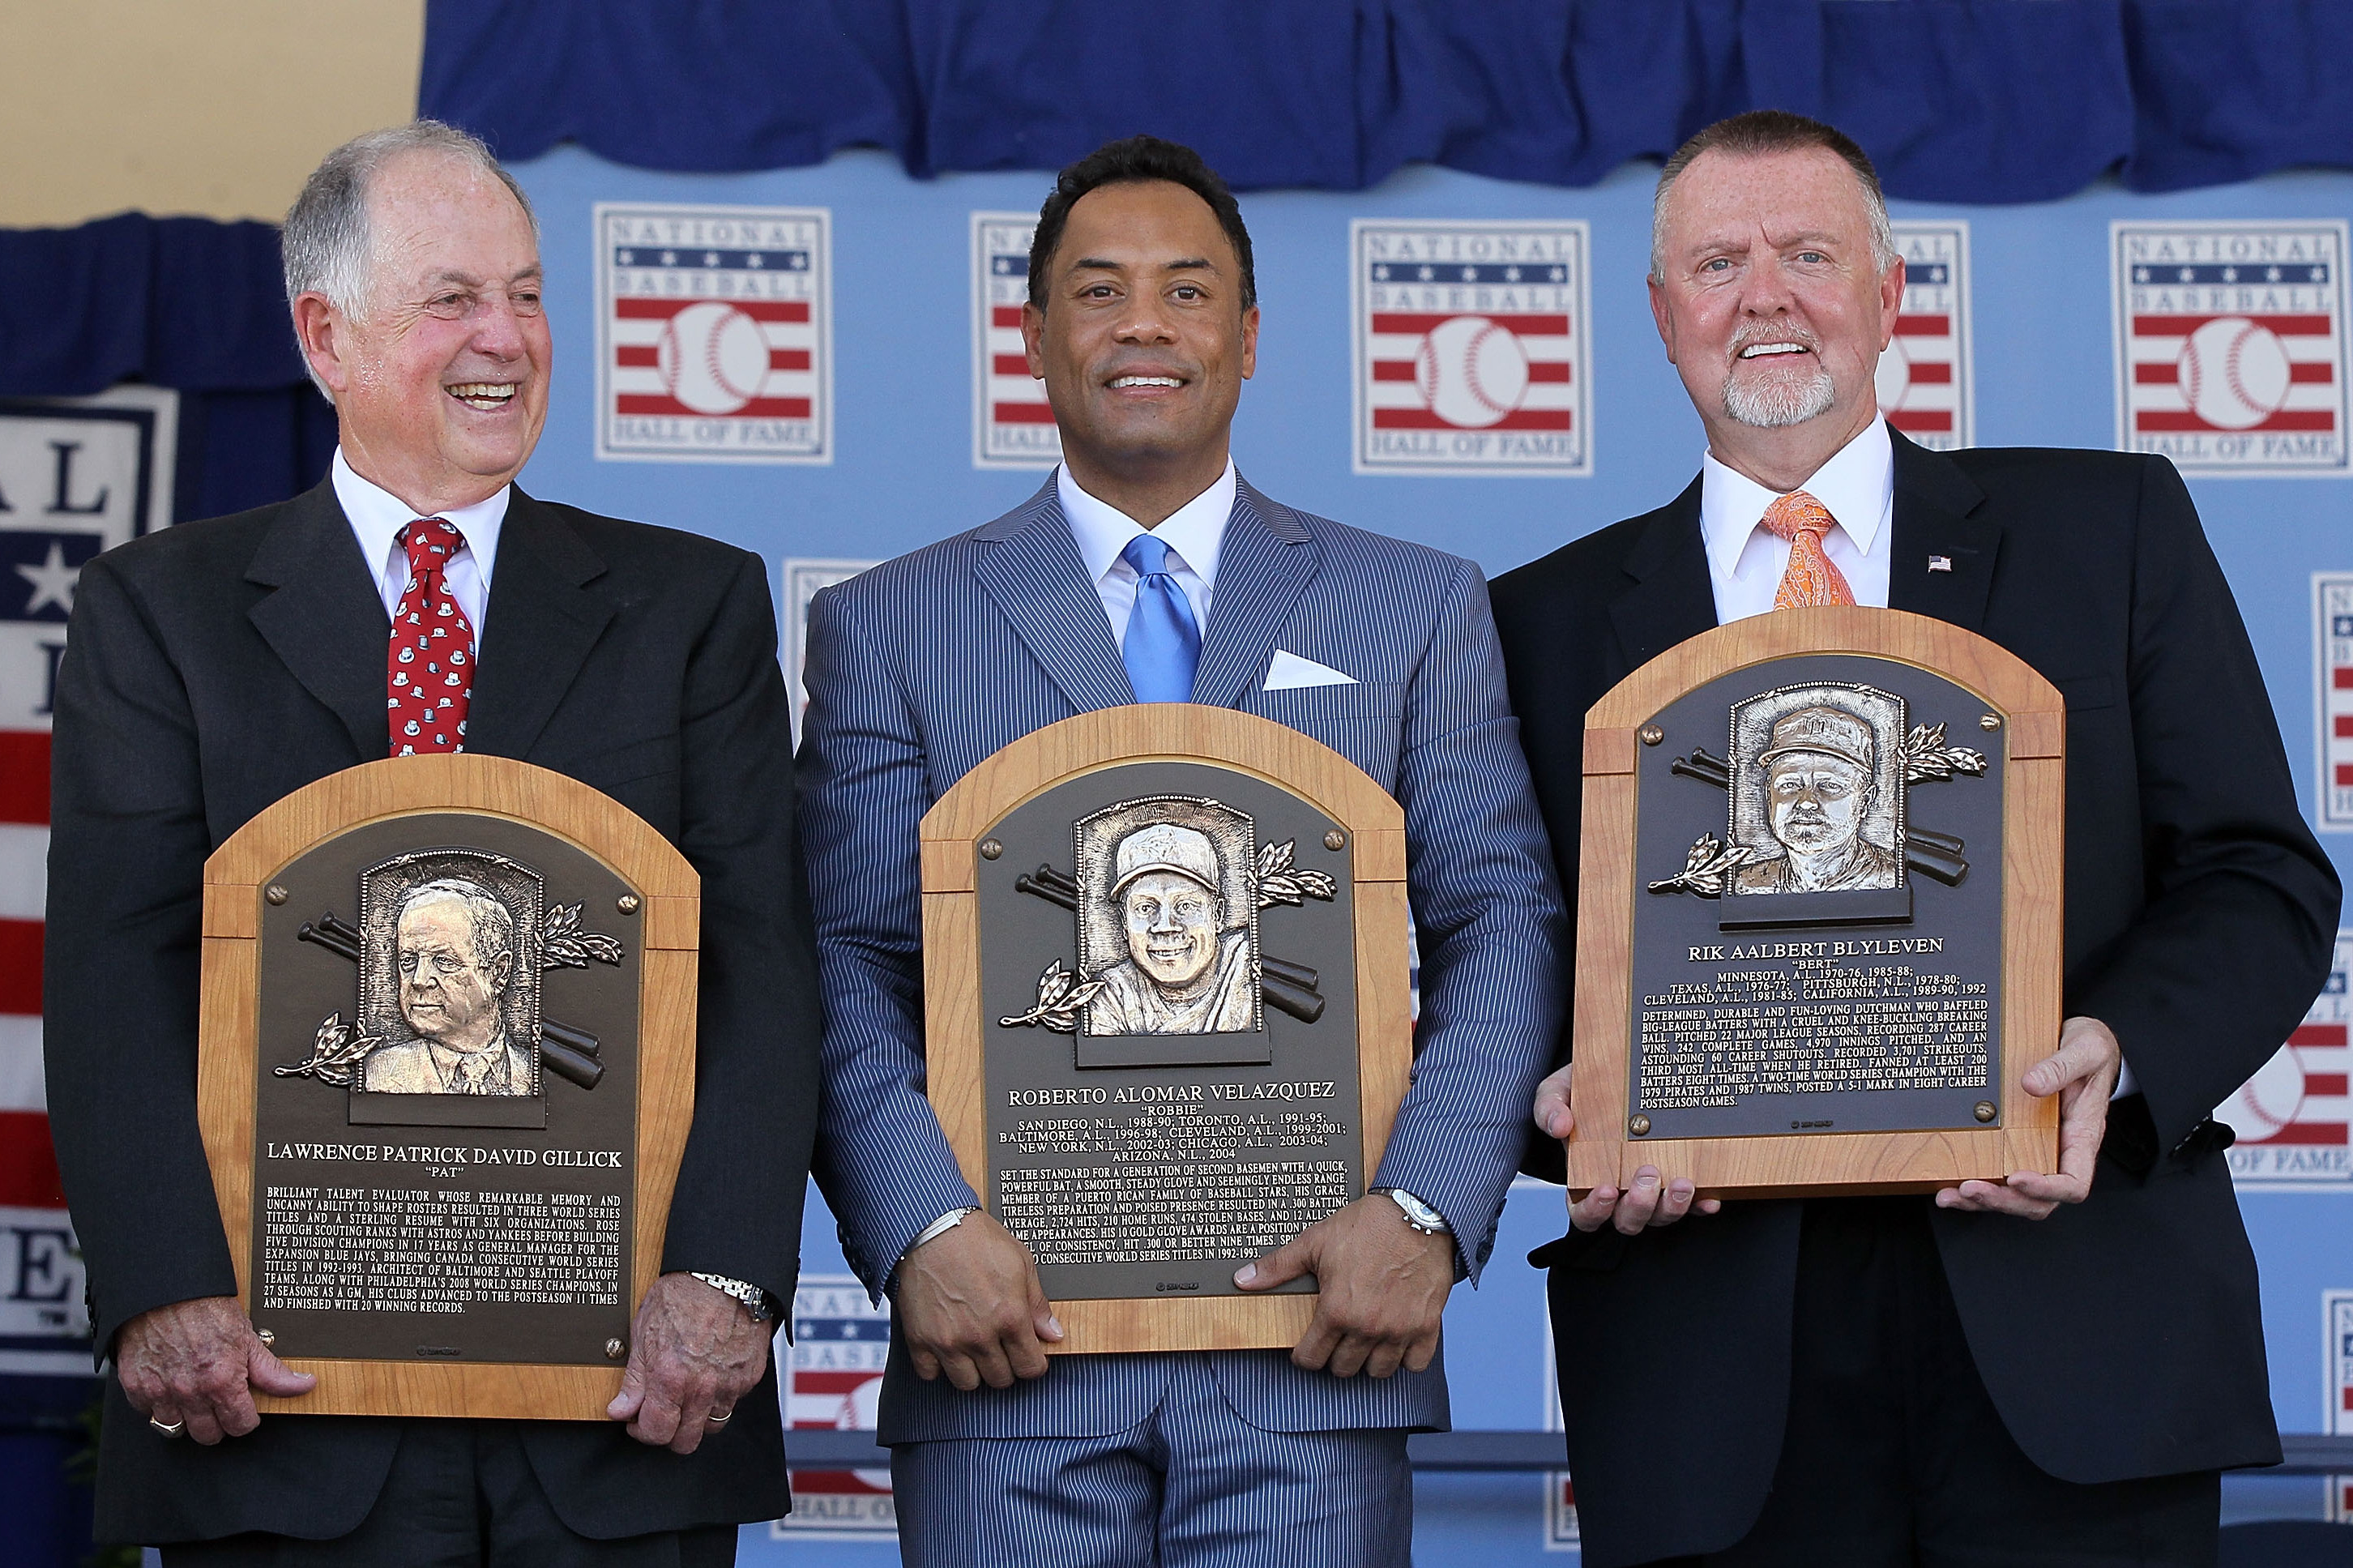 Roberto Alomar and Bert Blyleven elected to Baseball Hall of Fame